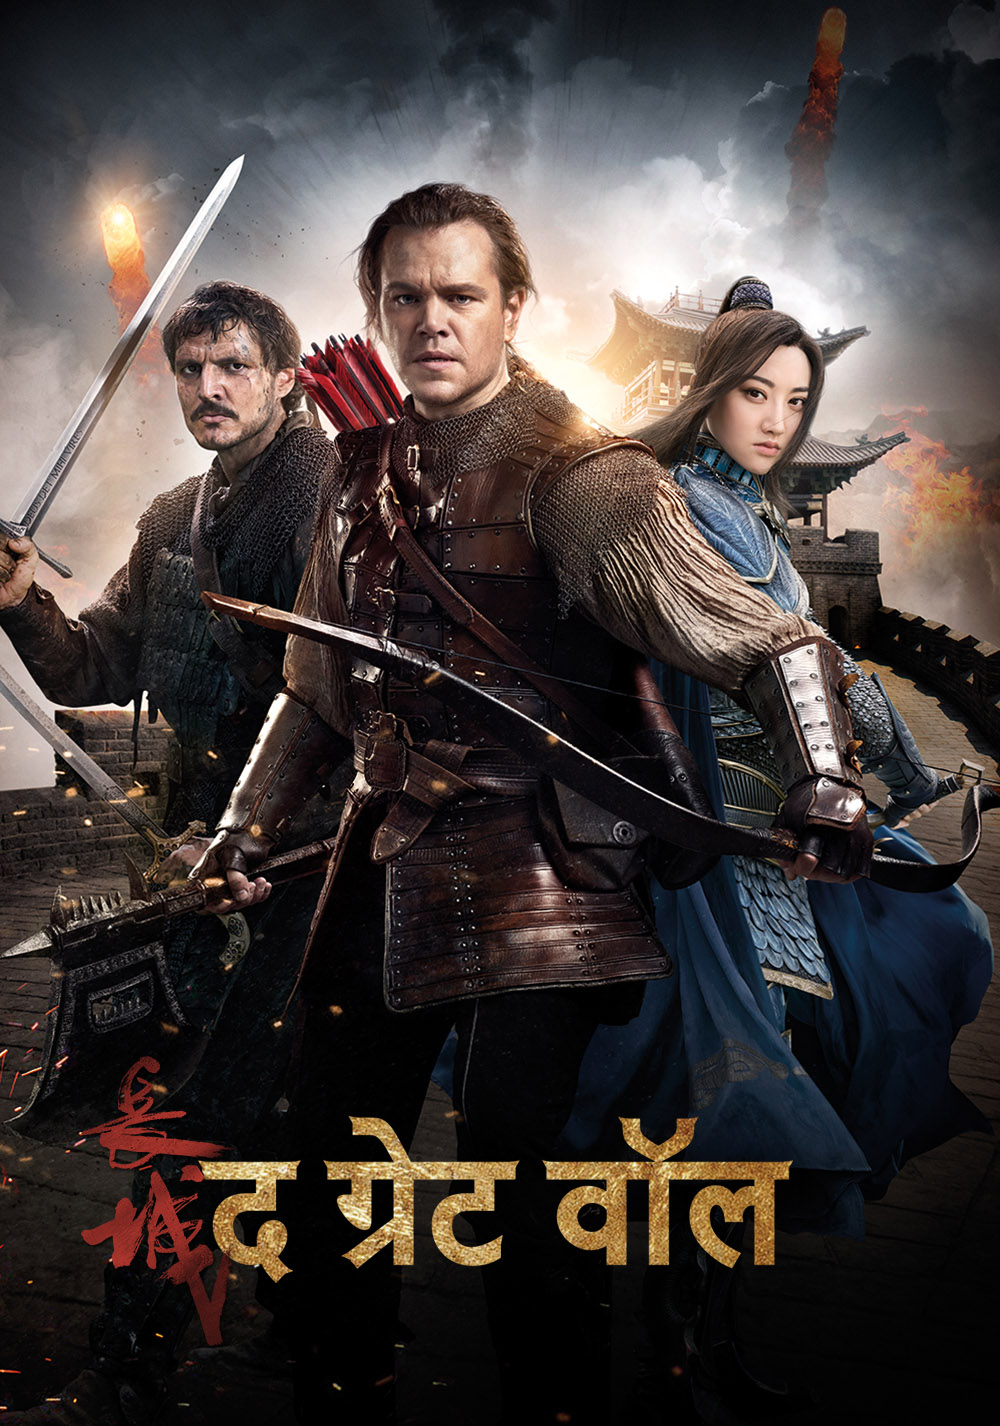 the great wall movie free download in hindi